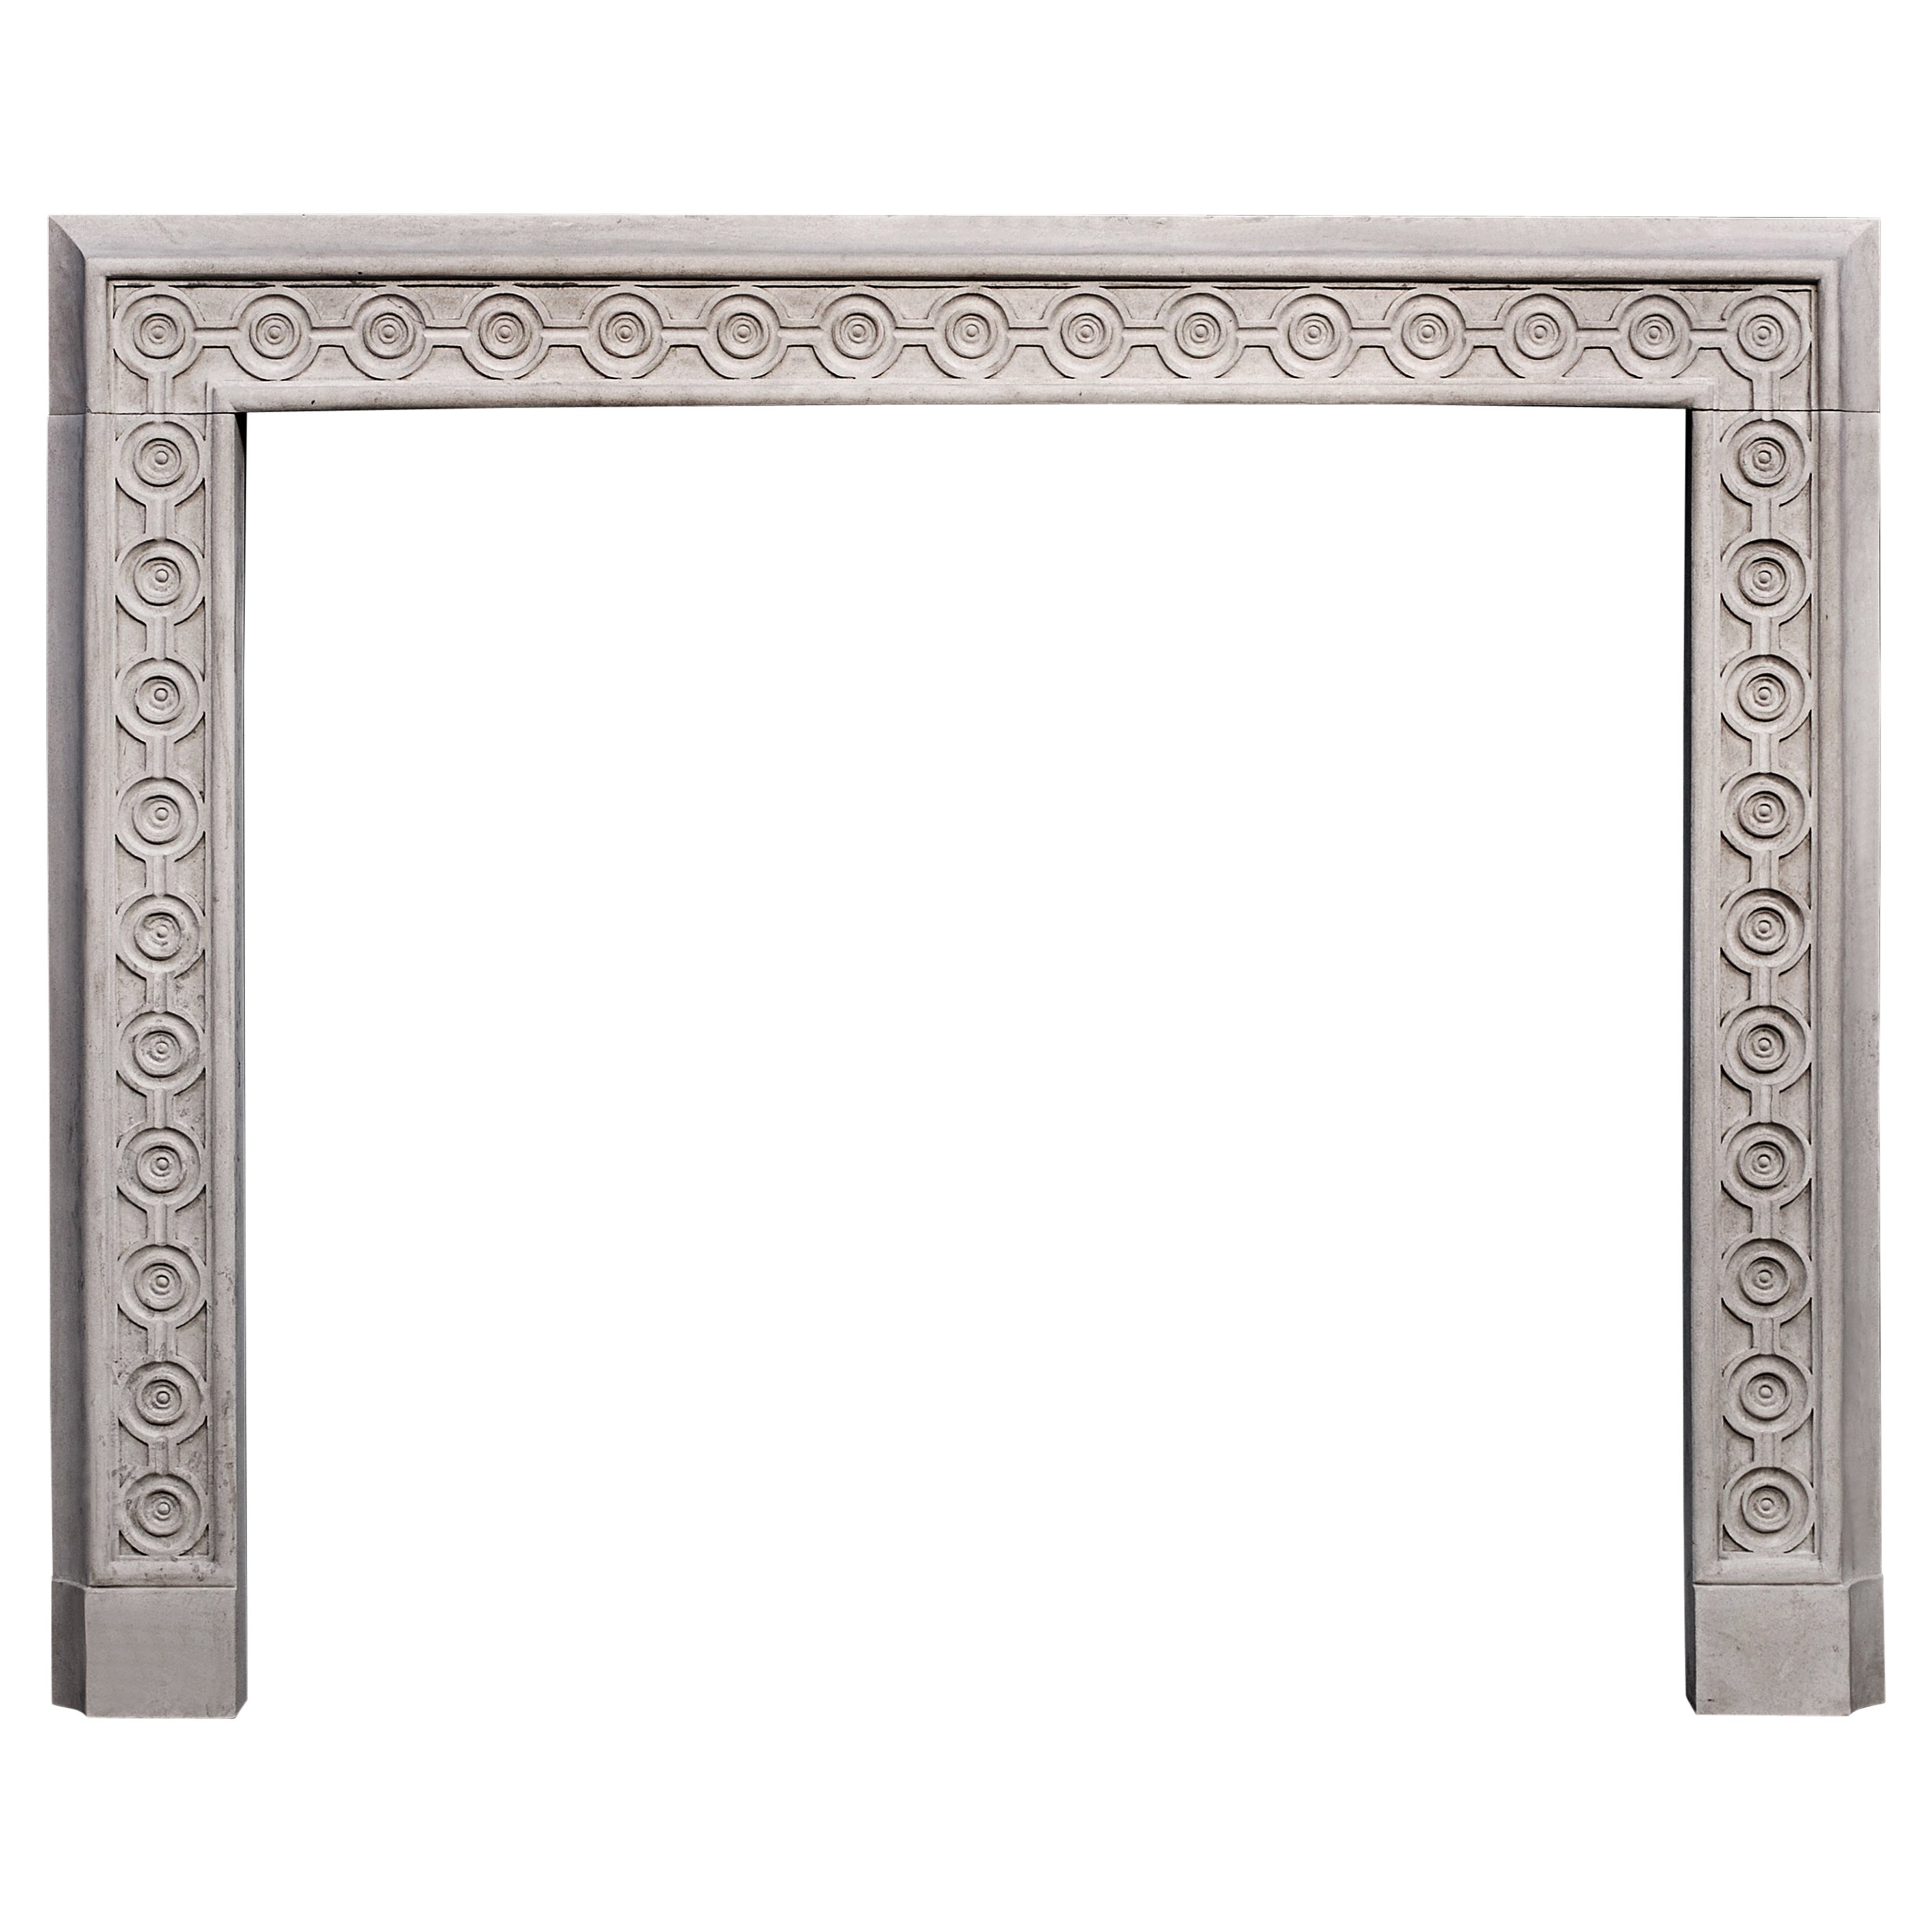 Bespoke Attractive English Limestone Fireplace with Guilloche Carving For Sale